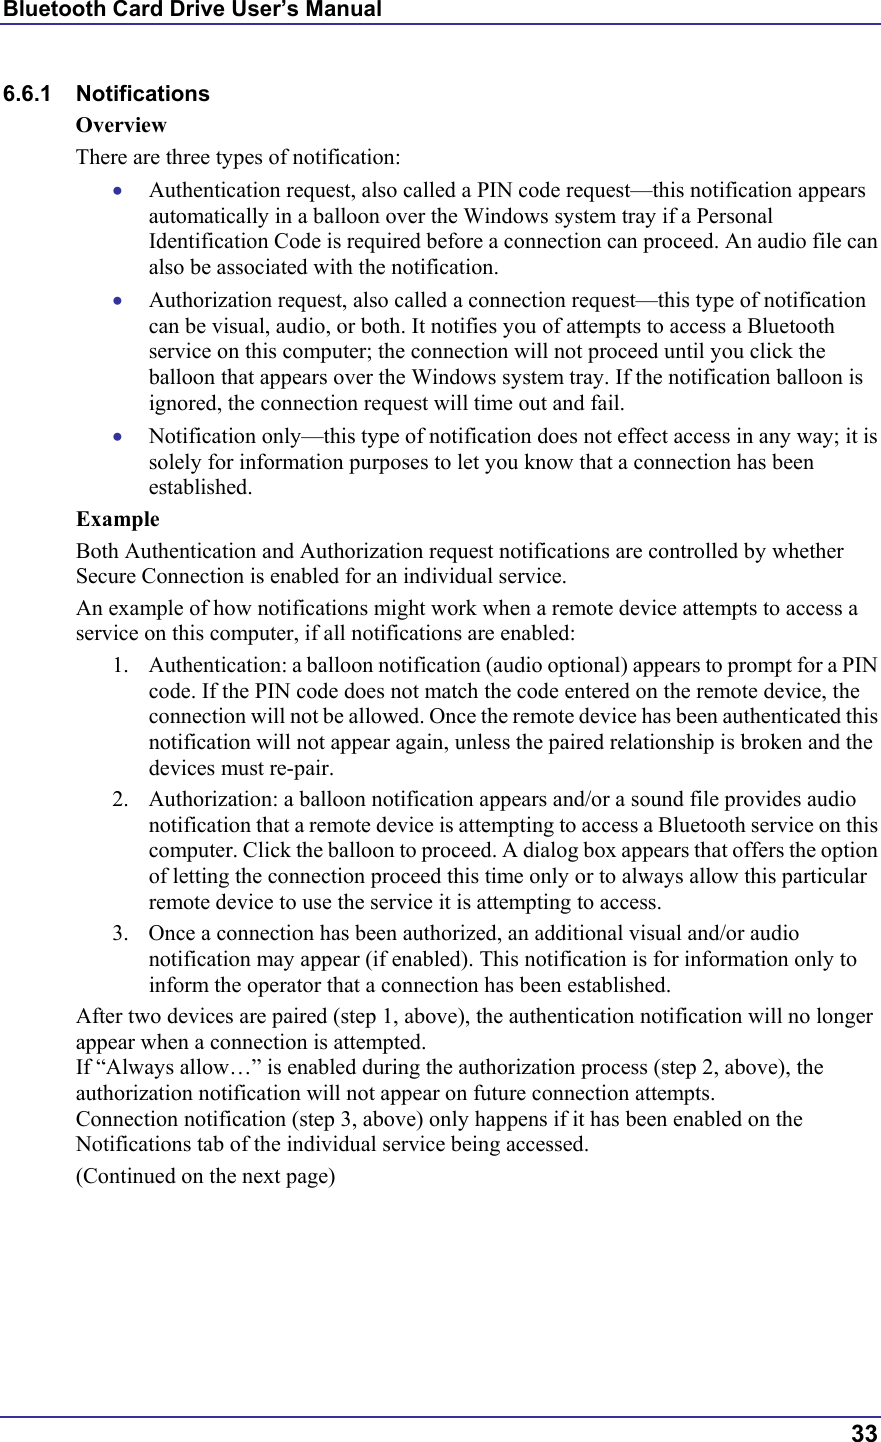 Bluetooth Card Drive User’s Manual  33 6.6.1 Notifications Overview There are three types of notification: •  Authentication request, also called a PIN code request—this notification appears automatically in a balloon over the Windows system tray if a Personal Identification Code is required before a connection can proceed. An audio file can also be associated with the notification. •  Authorization request, also called a connection request—this type of notification can be visual, audio, or both. It notifies you of attempts to access a Bluetooth service on this computer; the connection will not proceed until you click the balloon that appears over the Windows system tray. If the notification balloon is ignored, the connection request will time out and fail. •  Notification only—this type of notification does not effect access in any way; it is solely for information purposes to let you know that a connection has been established. Example Both Authentication and Authorization request notifications are controlled by whether Secure Connection is enabled for an individual service. An example of how notifications might work when a remote device attempts to access a service on this computer, if all notifications are enabled: 1.  Authentication: a balloon notification (audio optional) appears to prompt for a PIN code. If the PIN code does not match the code entered on the remote device, the connection will not be allowed. Once the remote device has been authenticated this notification will not appear again, unless the paired relationship is broken and the devices must re-pair. 2.  Authorization: a balloon notification appears and/or a sound file provides audio notification that a remote device is attempting to access a Bluetooth service on this computer. Click the balloon to proceed. A dialog box appears that offers the option of letting the connection proceed this time only or to always allow this particular remote device to use the service it is attempting to access. 3.  Once a connection has been authorized, an additional visual and/or audio notification may appear (if enabled). This notification is for information only to inform the operator that a connection has been established. After two devices are paired (step 1, above), the authentication notification will no longer appear when a connection is attempted. If “Always allow…” is enabled during the authorization process (step 2, above), the authorization notification will not appear on future connection attempts. Connection notification (step 3, above) only happens if it has been enabled on the Notifications tab of the individual service being accessed. (Continued on the next page) 